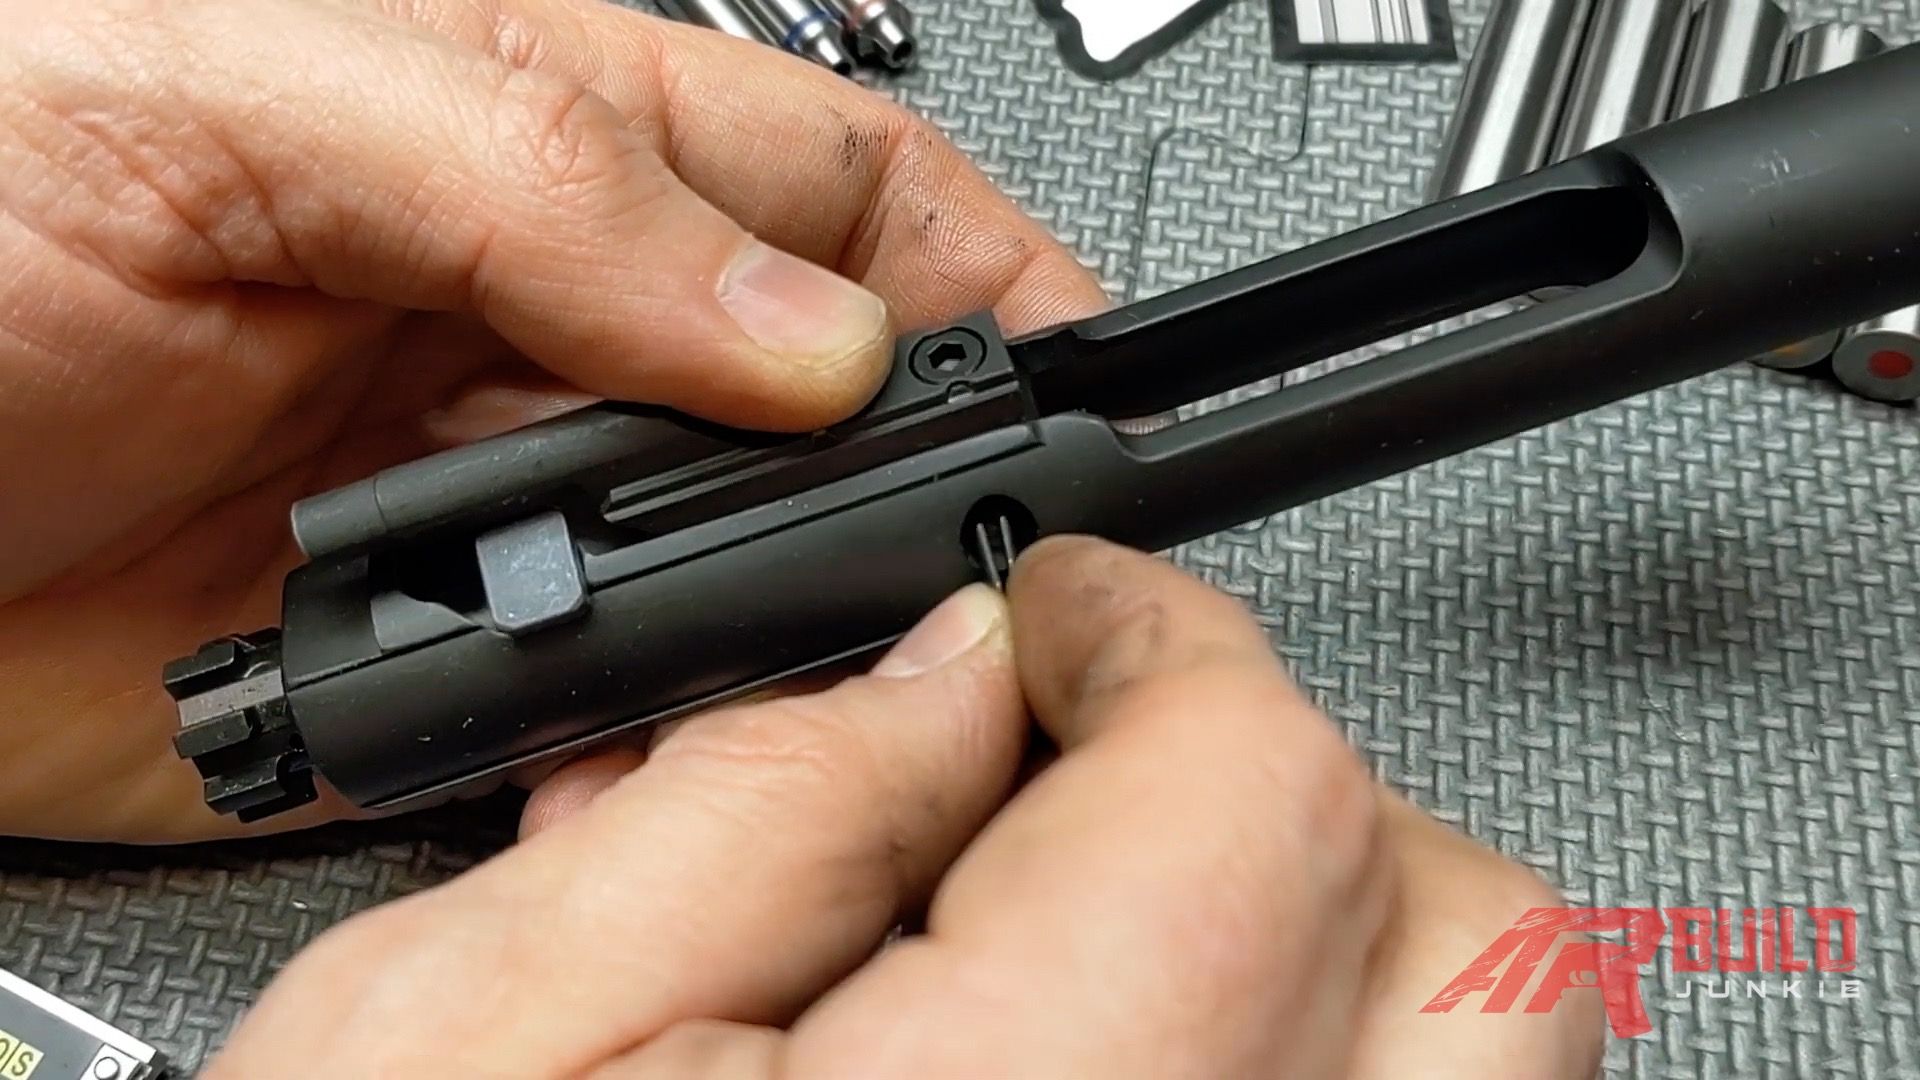 Simple Install Trick for Difficult AR-15 Firing Pin Retaining Pins - School of the American Rifle